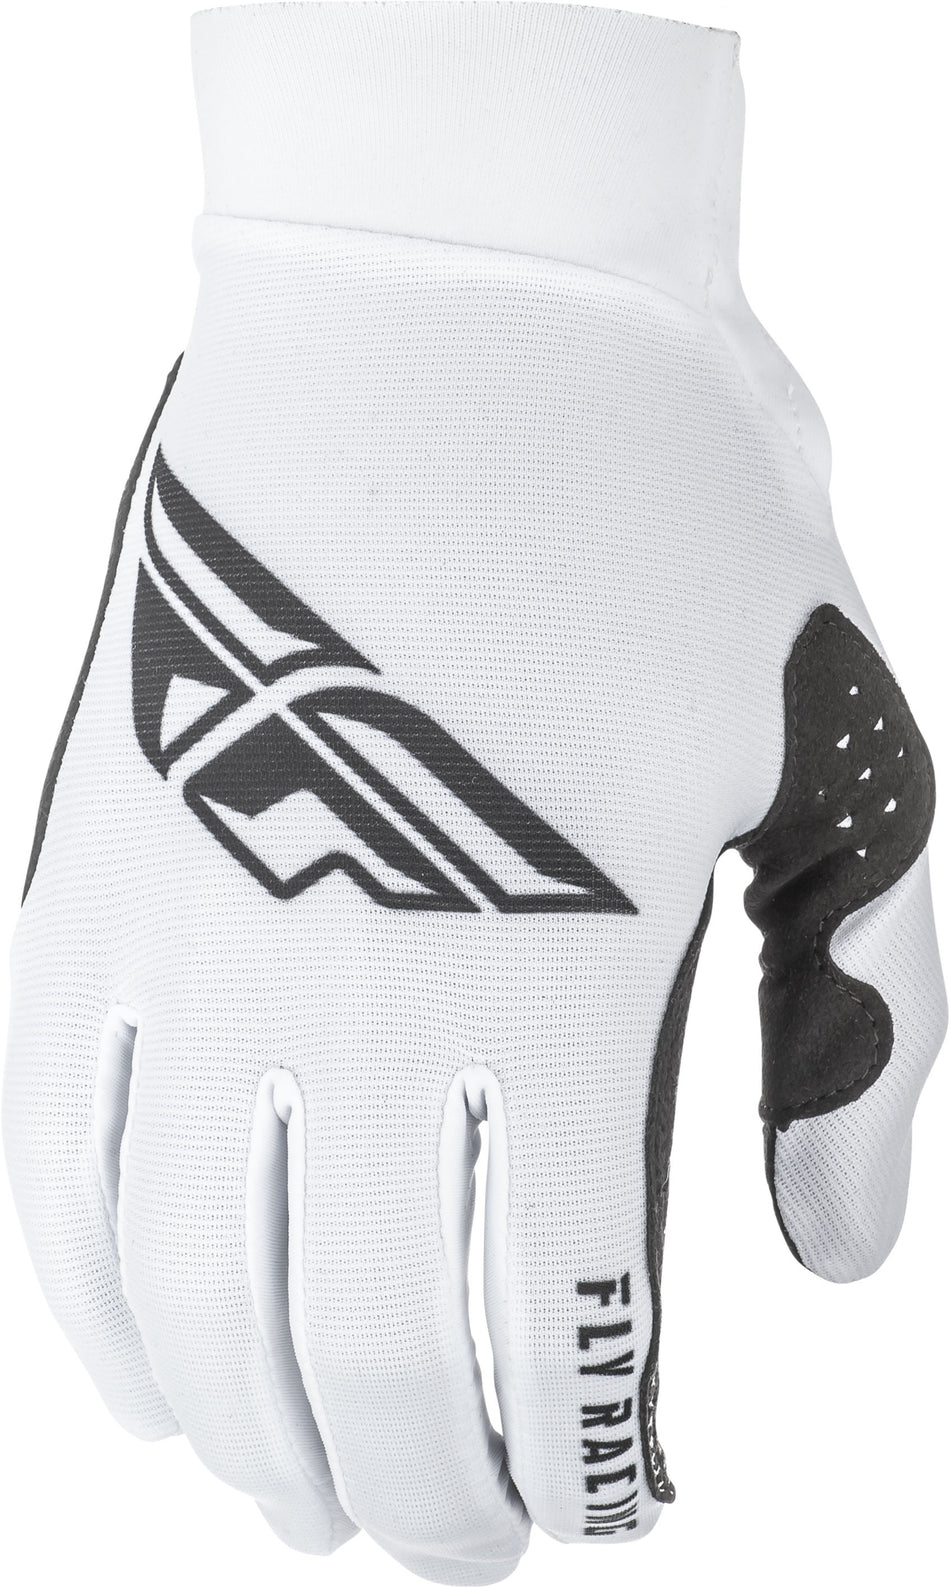 FLY RACING Pro Lite Gloves White Sz 12 372-81412